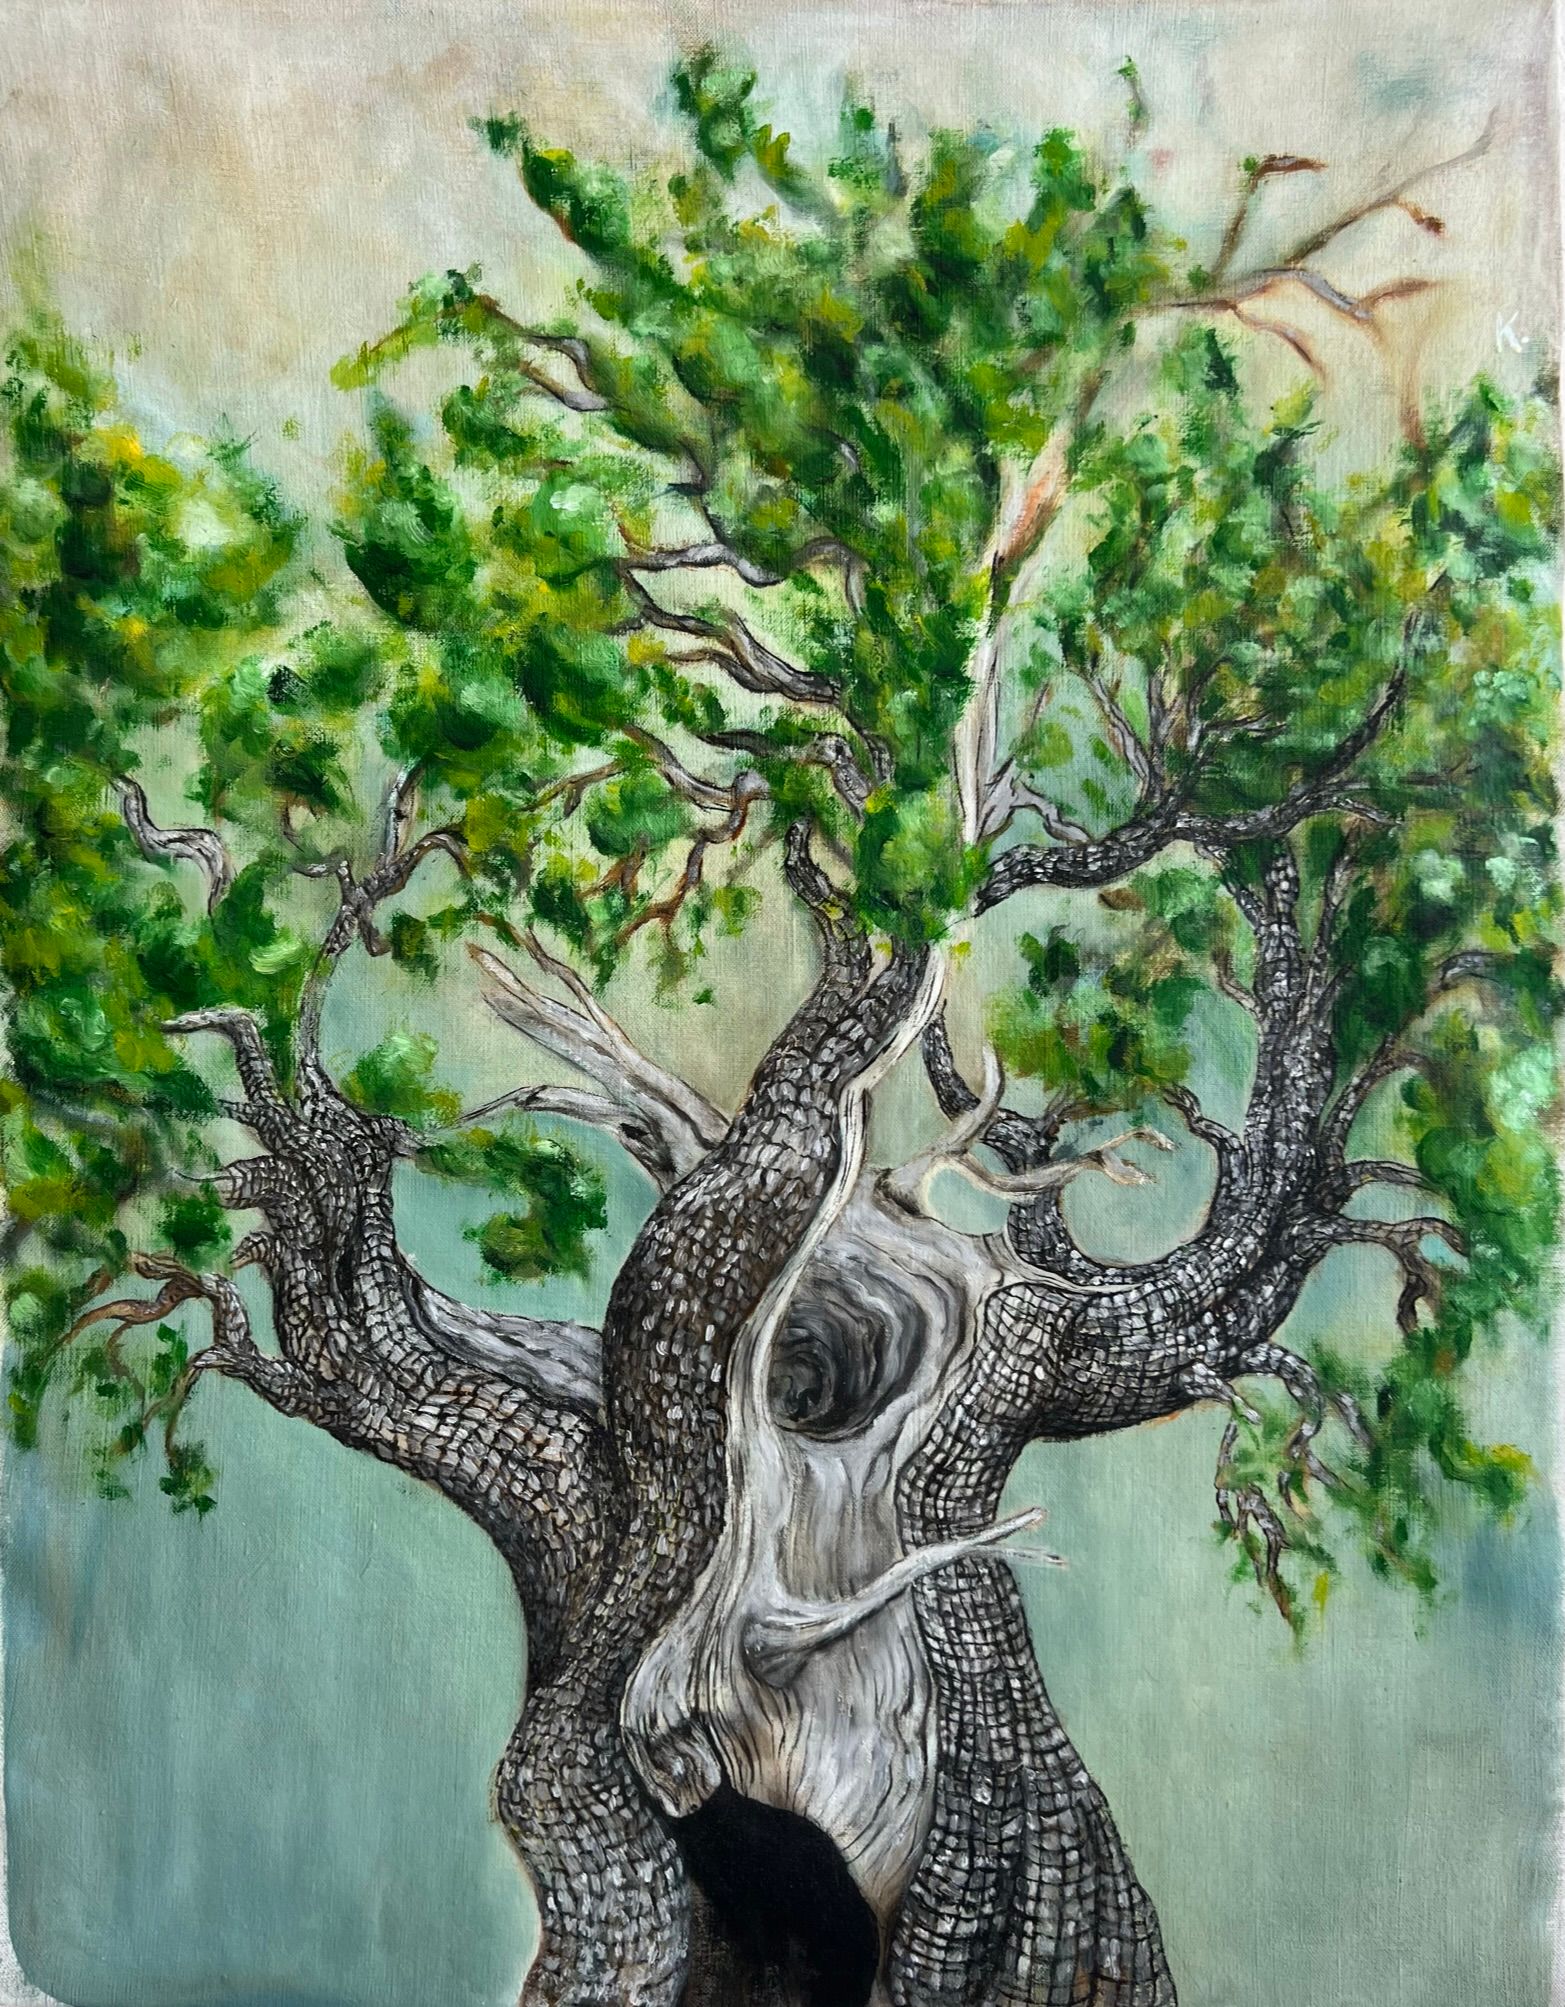 An ancient alligator juniper tree fills a whole canvas of a painting with tiled bark and sparse green vegetation.